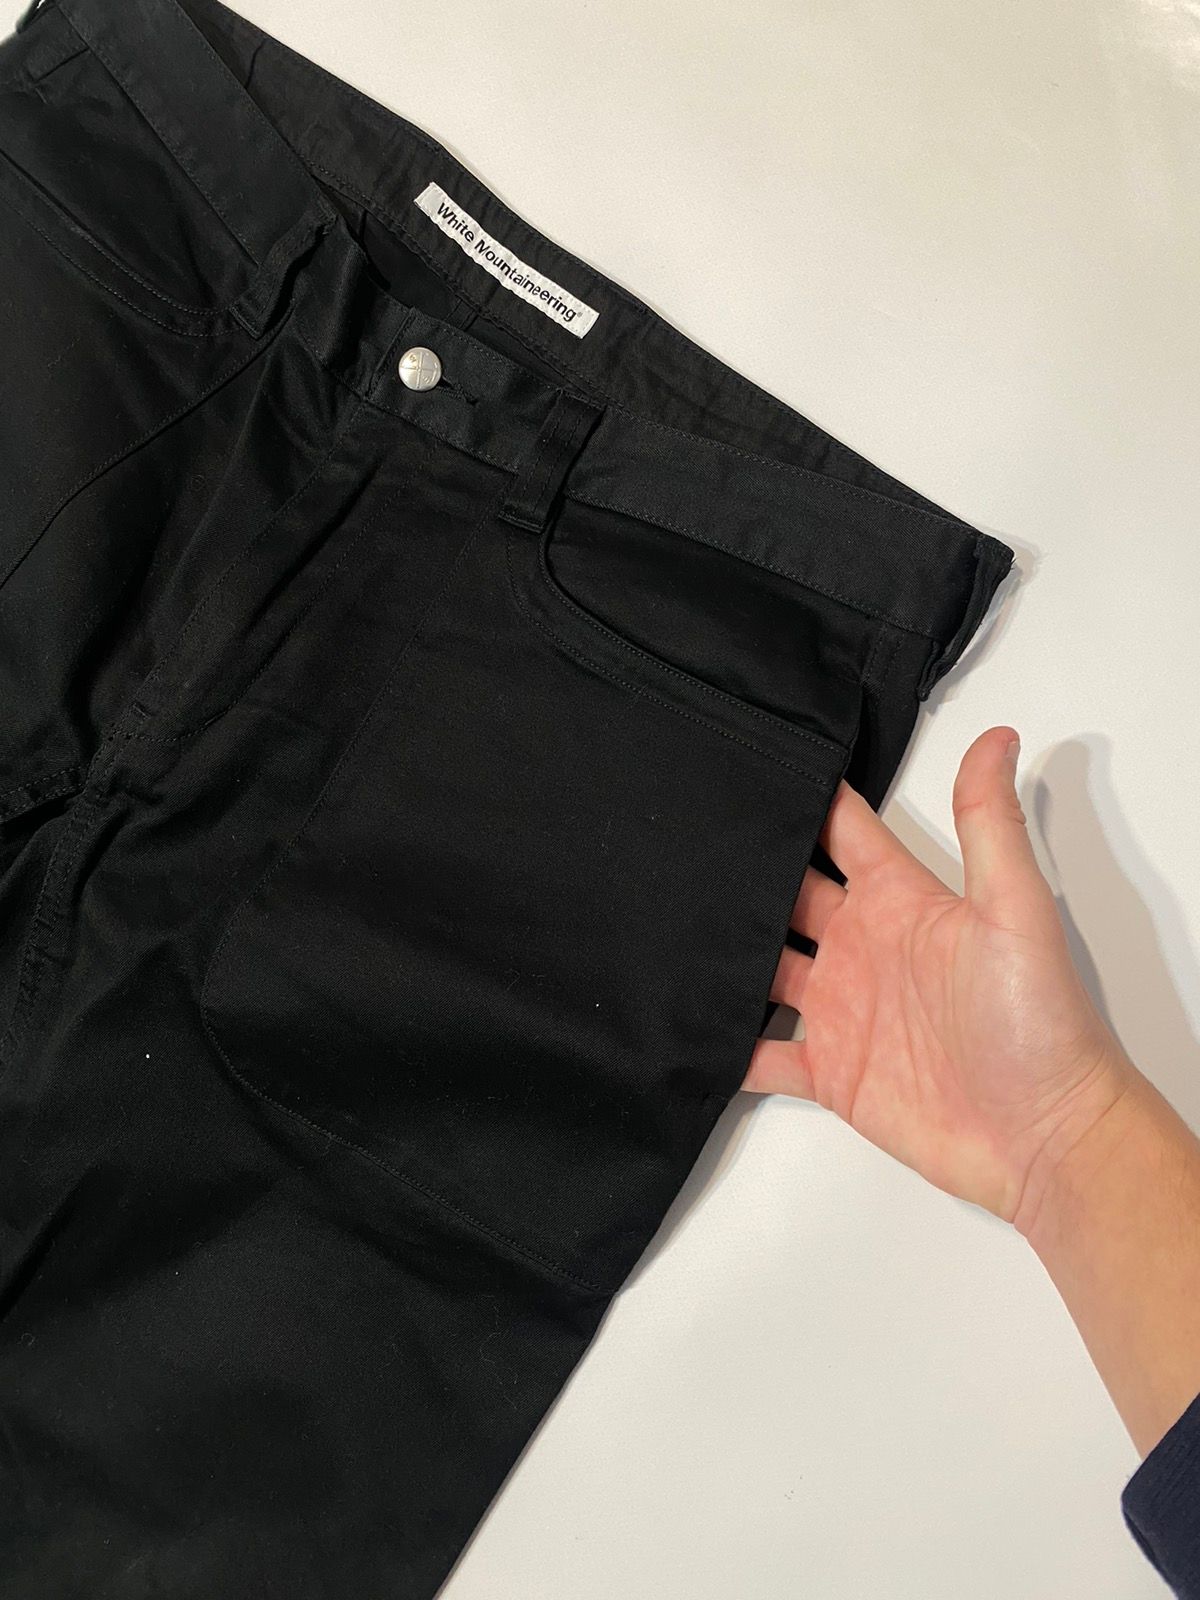 White Mountaineering MADE IN JAPAN White Moutaineering Casual Black Pants Size US 34 / EU 50 - 7 Thumbnail